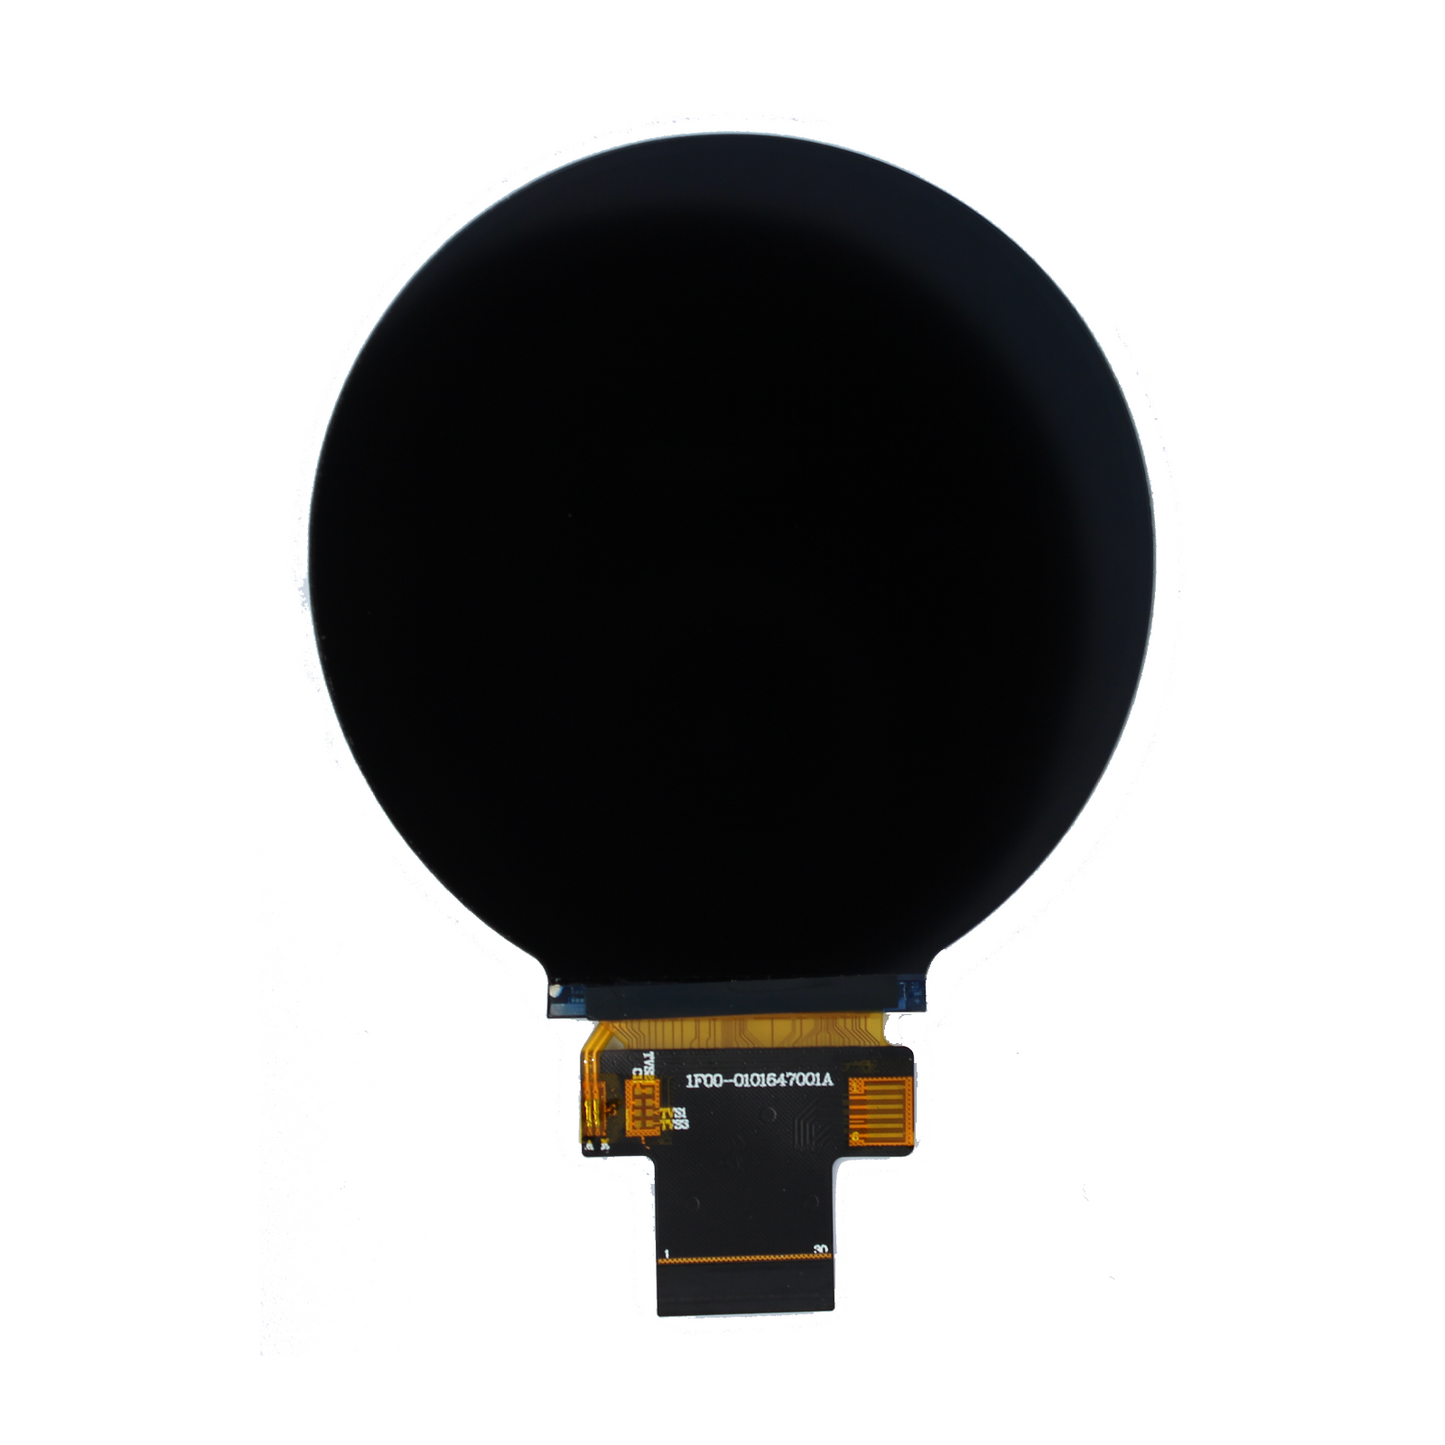 2.76 inch Round TFT Display Panel with 480x480 resolution, utilizing MIPI and RGB interfaces